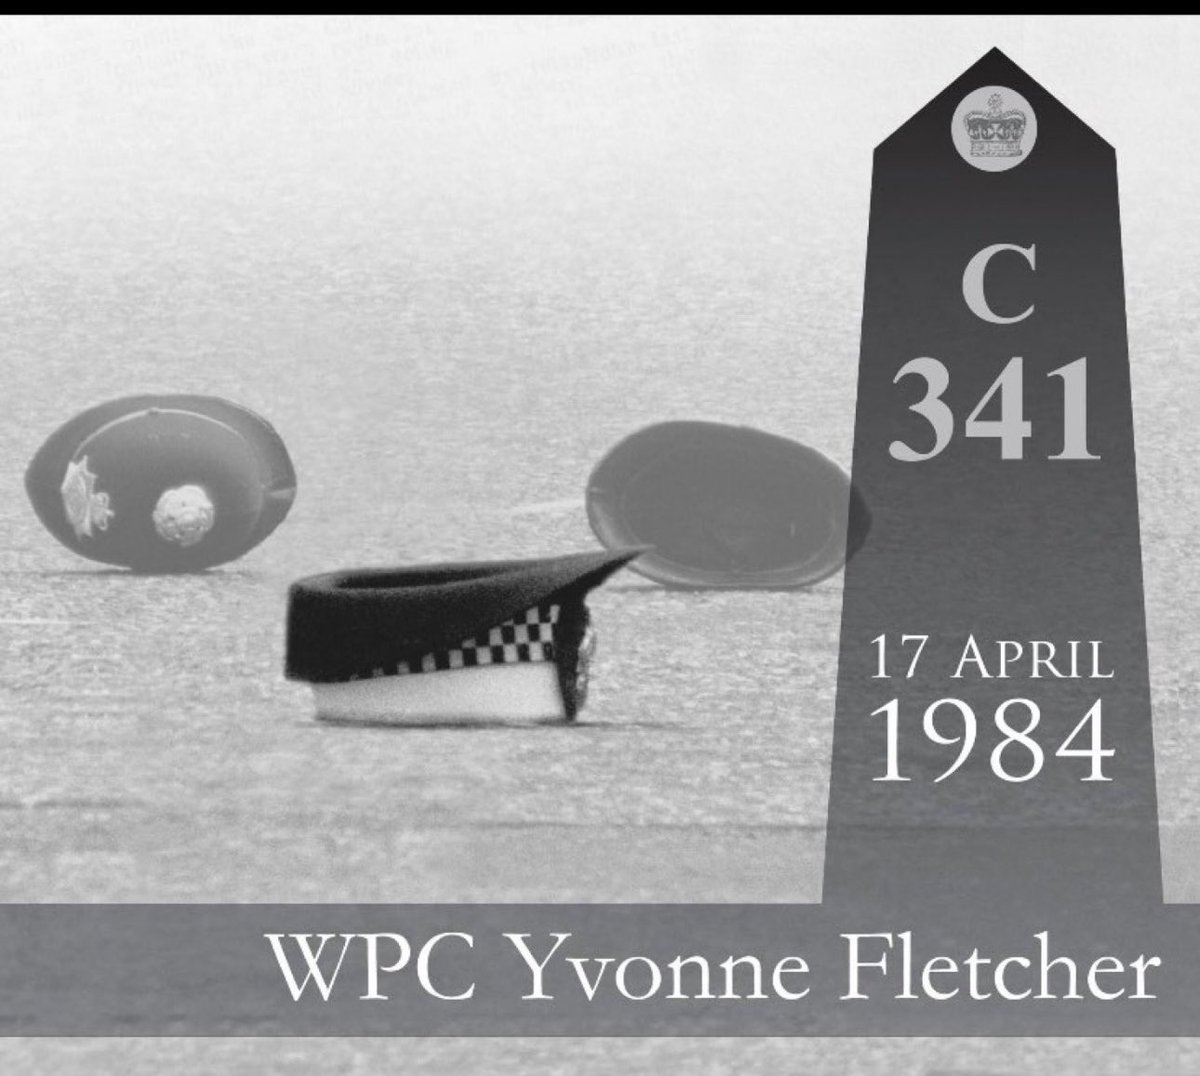 Today marks the 40th Anniversary of the murder of Yvonne Fletcher. Officers who knew Yvonne and others will pause and reflect. This sense of loyalty is something @MrGerryCampbell @Niven_Rennie talk about in our work with UK policing. It’s a strength in our profession.